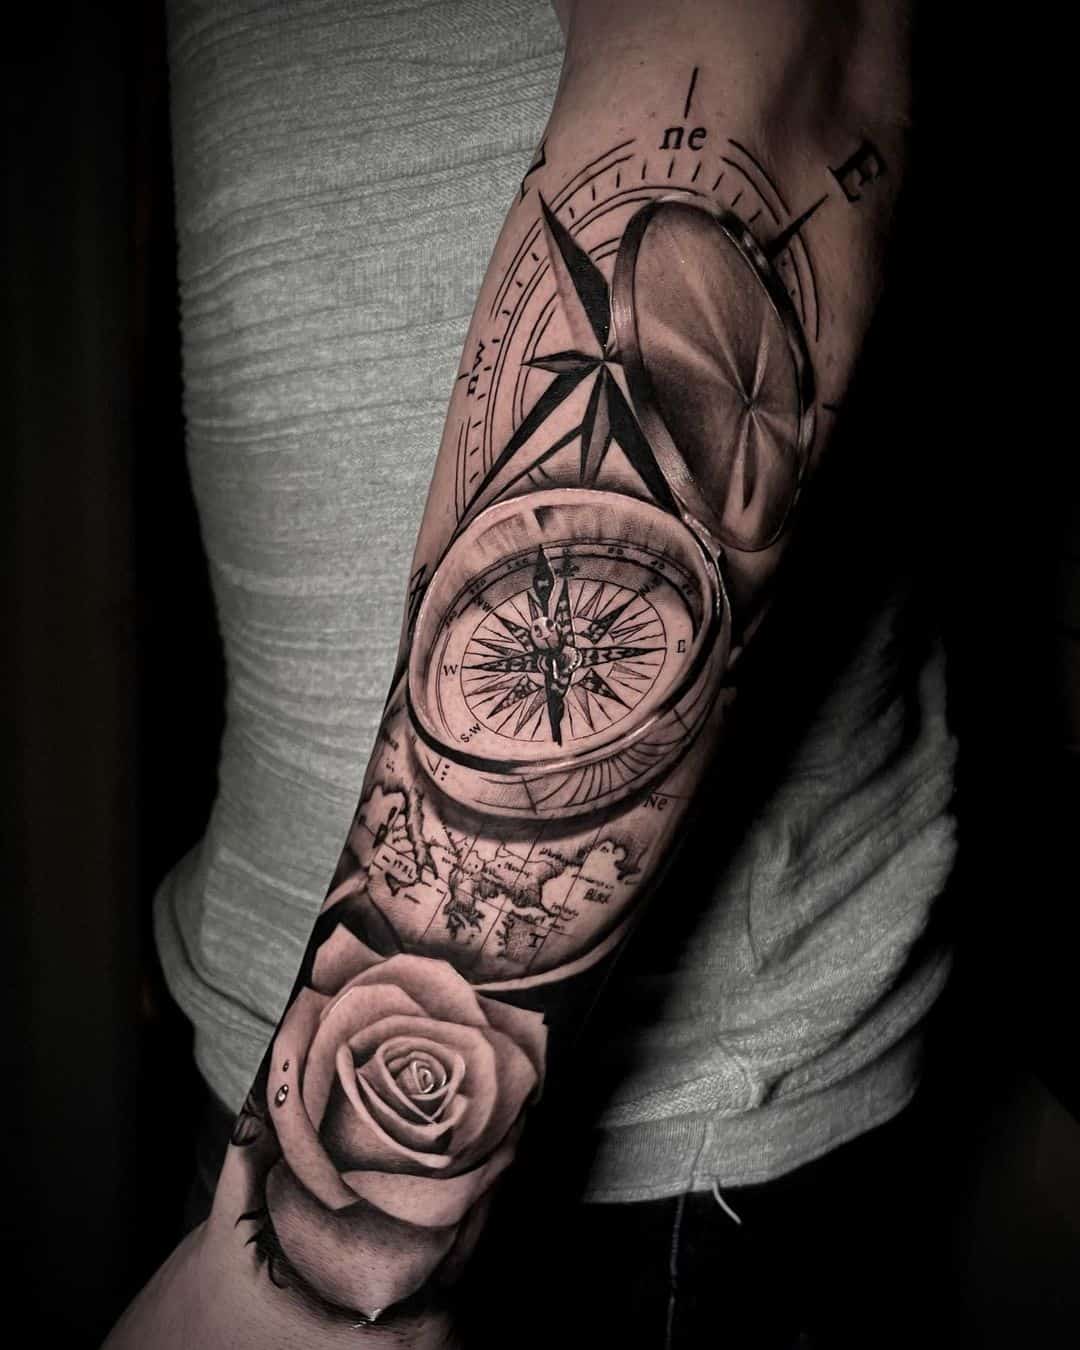 Simply Inked Compass Tattoo, Modern Waterproof and Long Lasting Tattoo  Design For Men - Colour: Black for All Occasion - Walmart.com